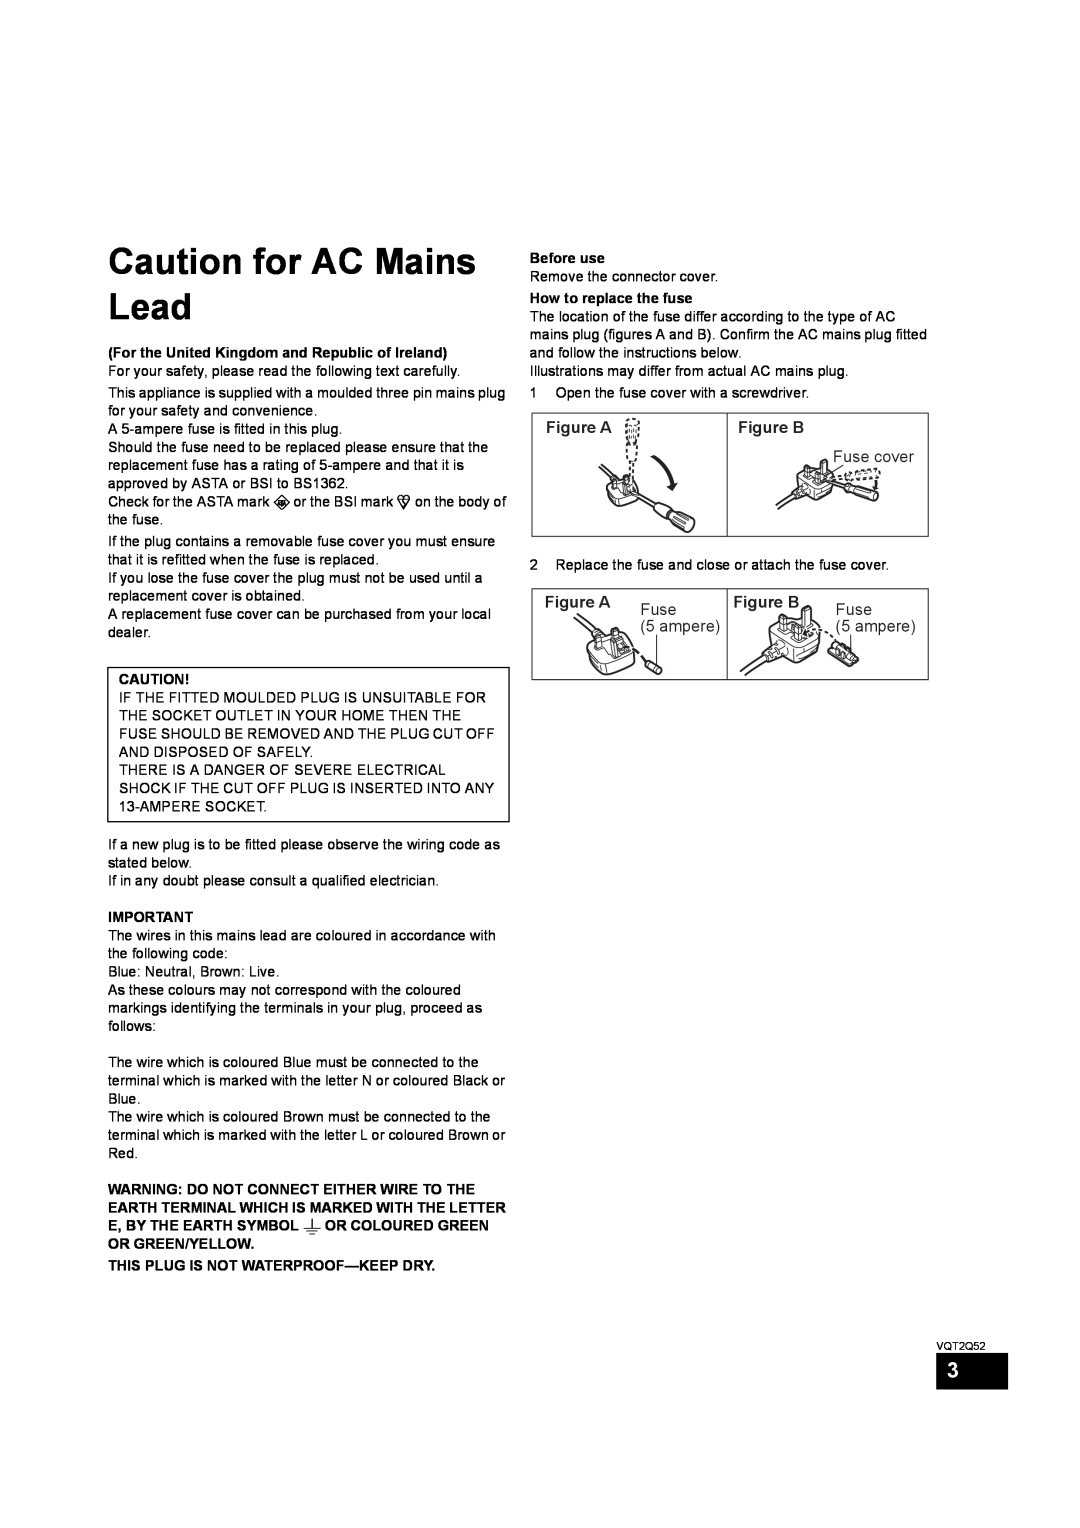 Philips SC-BT735 operating instructions Caution for AC Mains Lead, Figure A, Figure B 